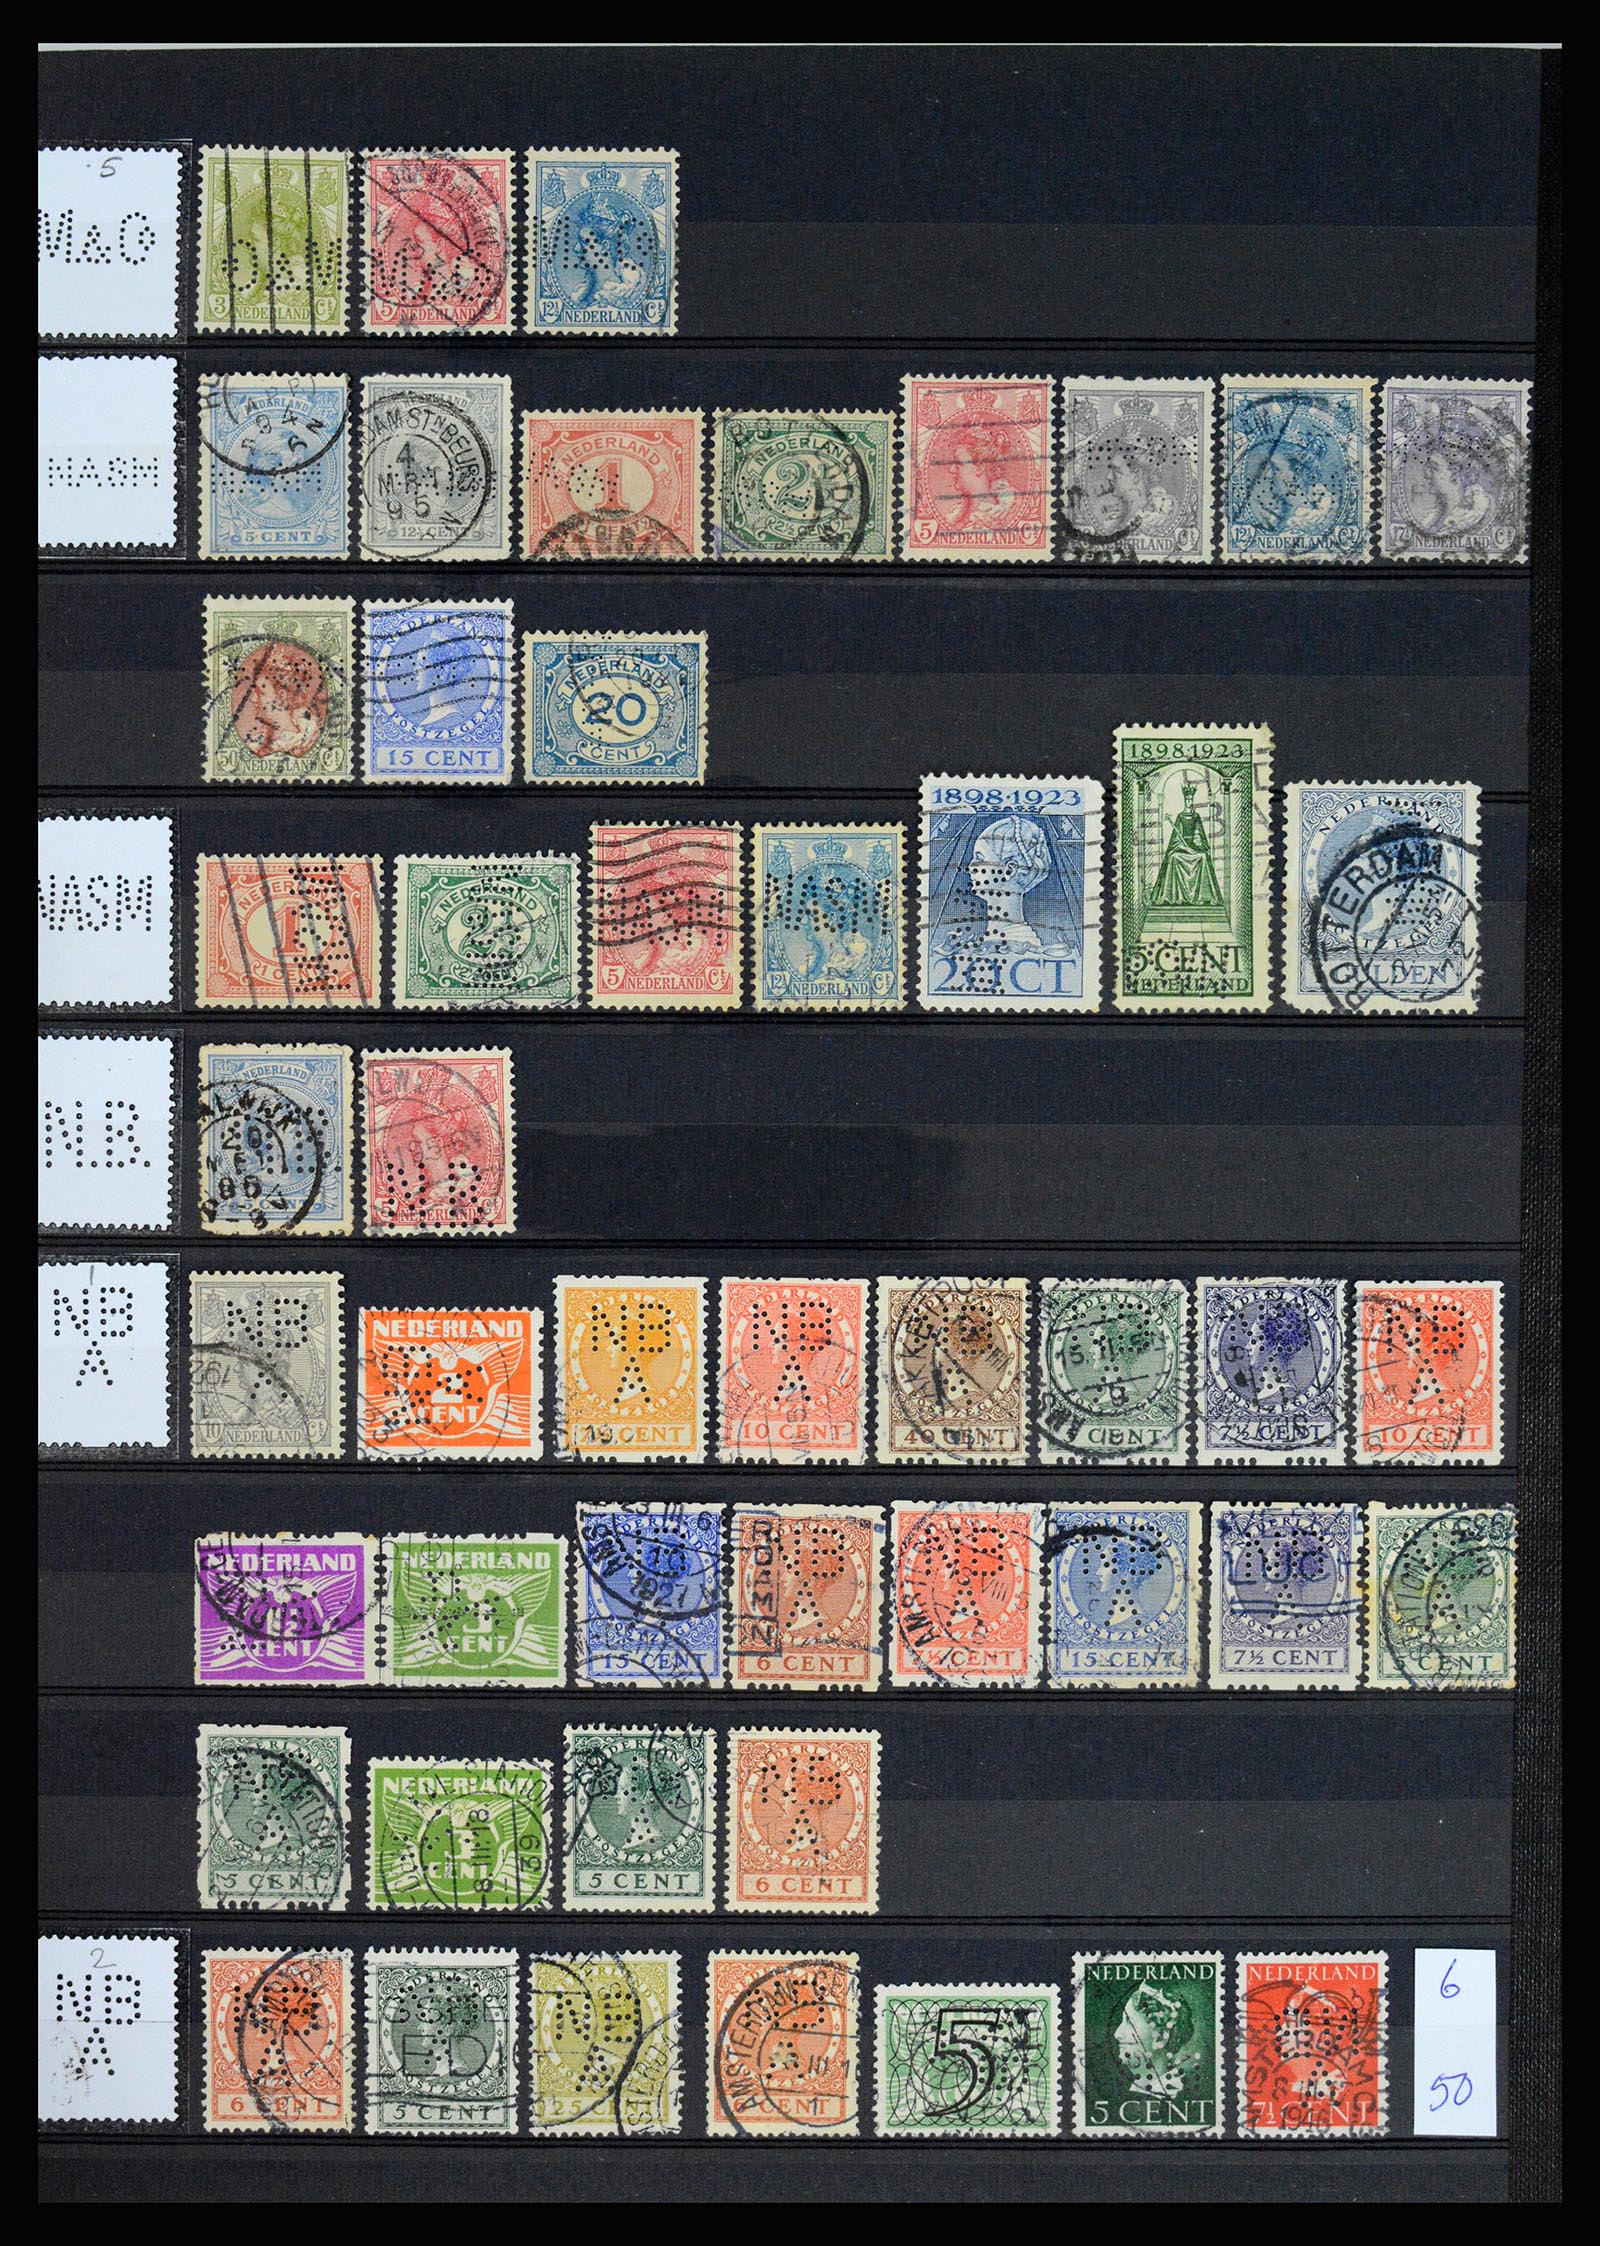 37183 033 - Stamp collection 37183 Netherlands perfins 1872-1960.